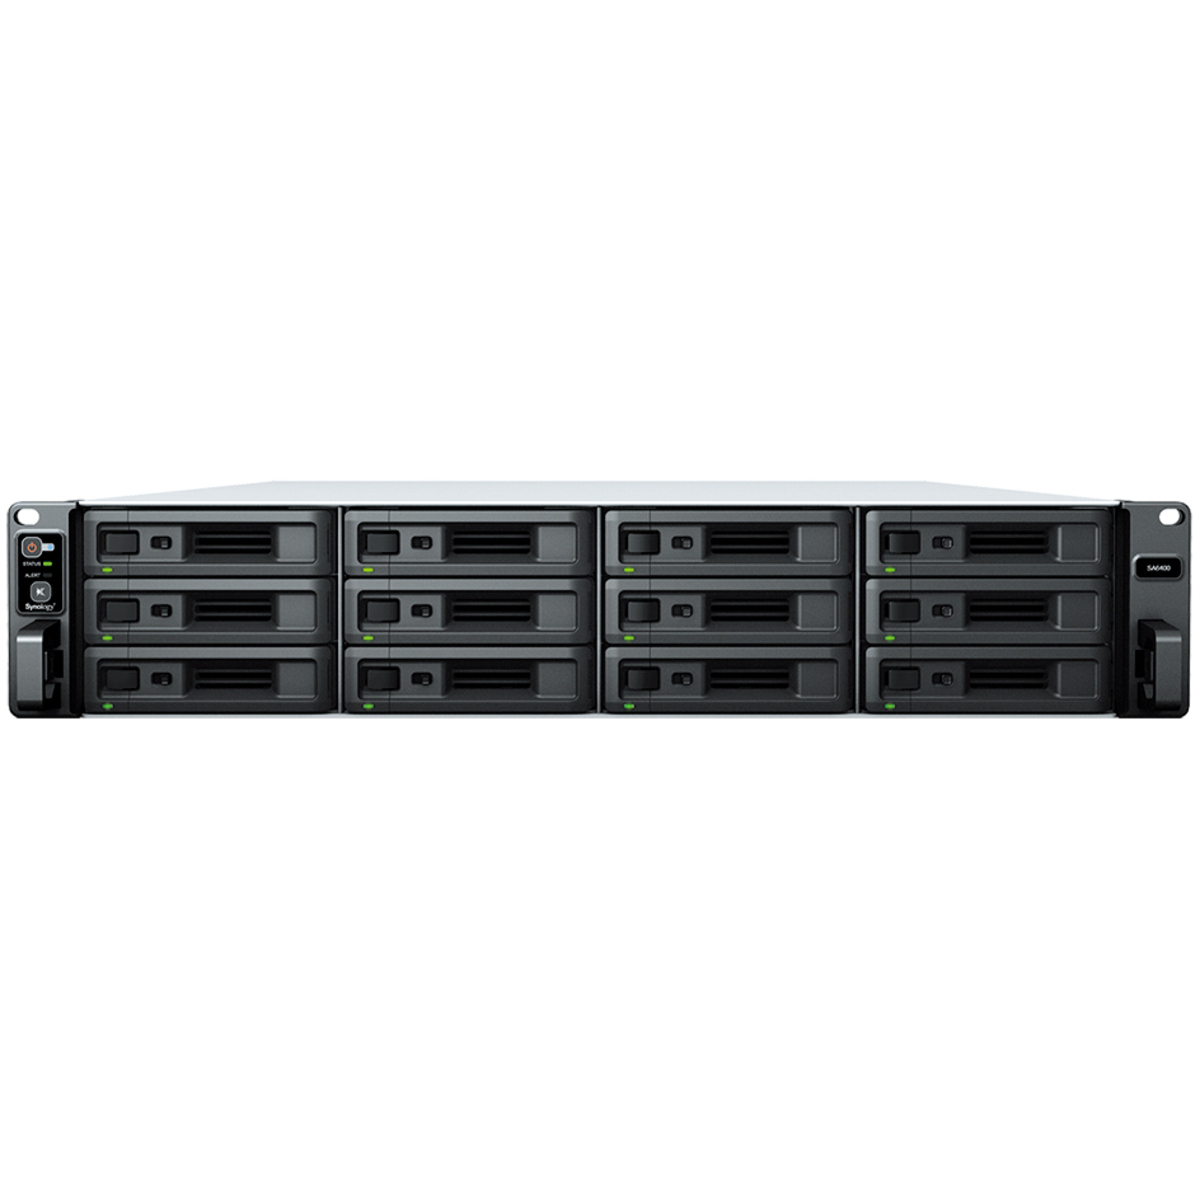 Synology RackStation SA6400 200tb 12-Bay RackMount Large Business / Enterprise NAS - Network Attached Storage Device 10x20tb Western Digital Ultrastar HC560 WUH722020ALE6L4 3.5 7200rpm SATA 6Gb/s HDD ENTERPRISE Class Drives Installed - Burn-In Tested RackStation SA6400